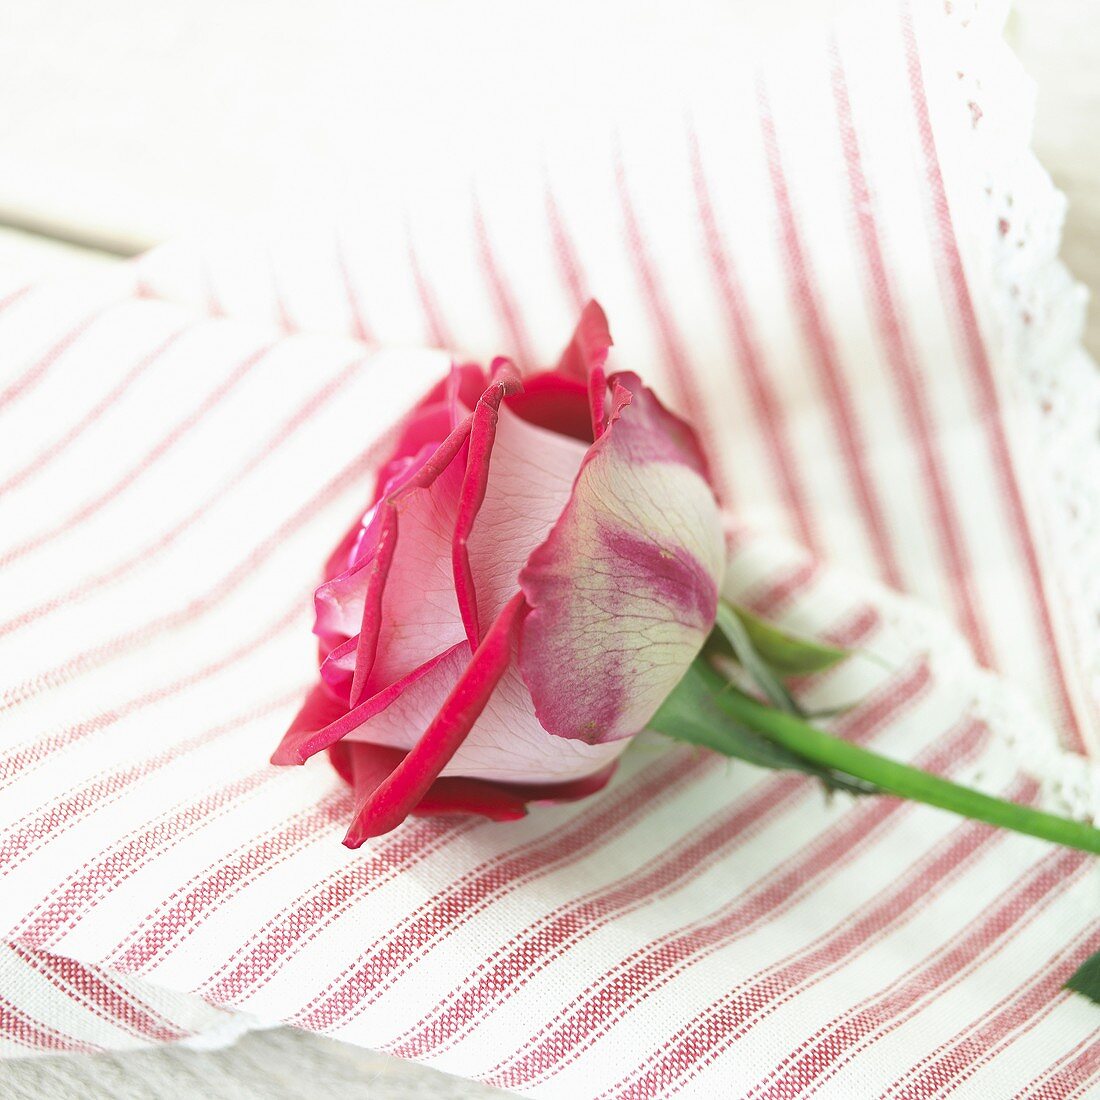 Pink rose on striped fabric